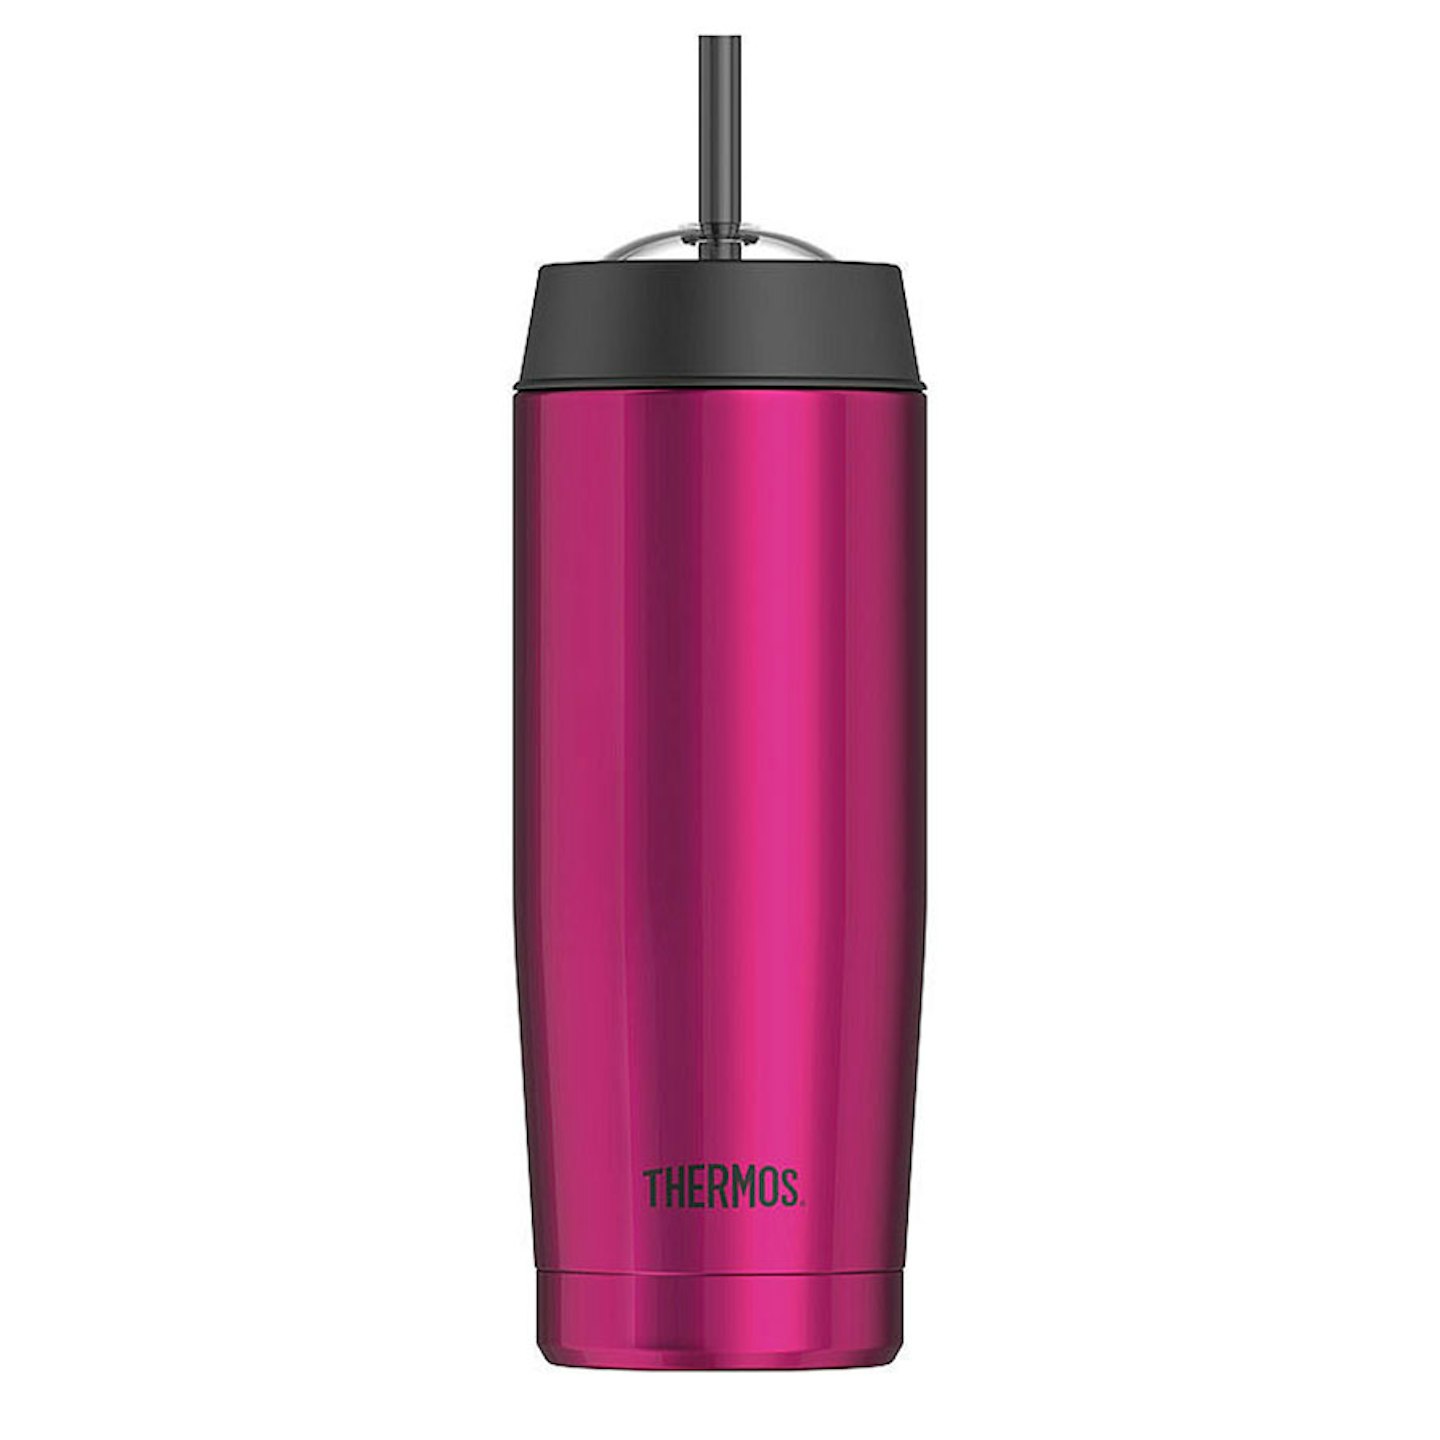 Thermos Cold Cup, £17.99